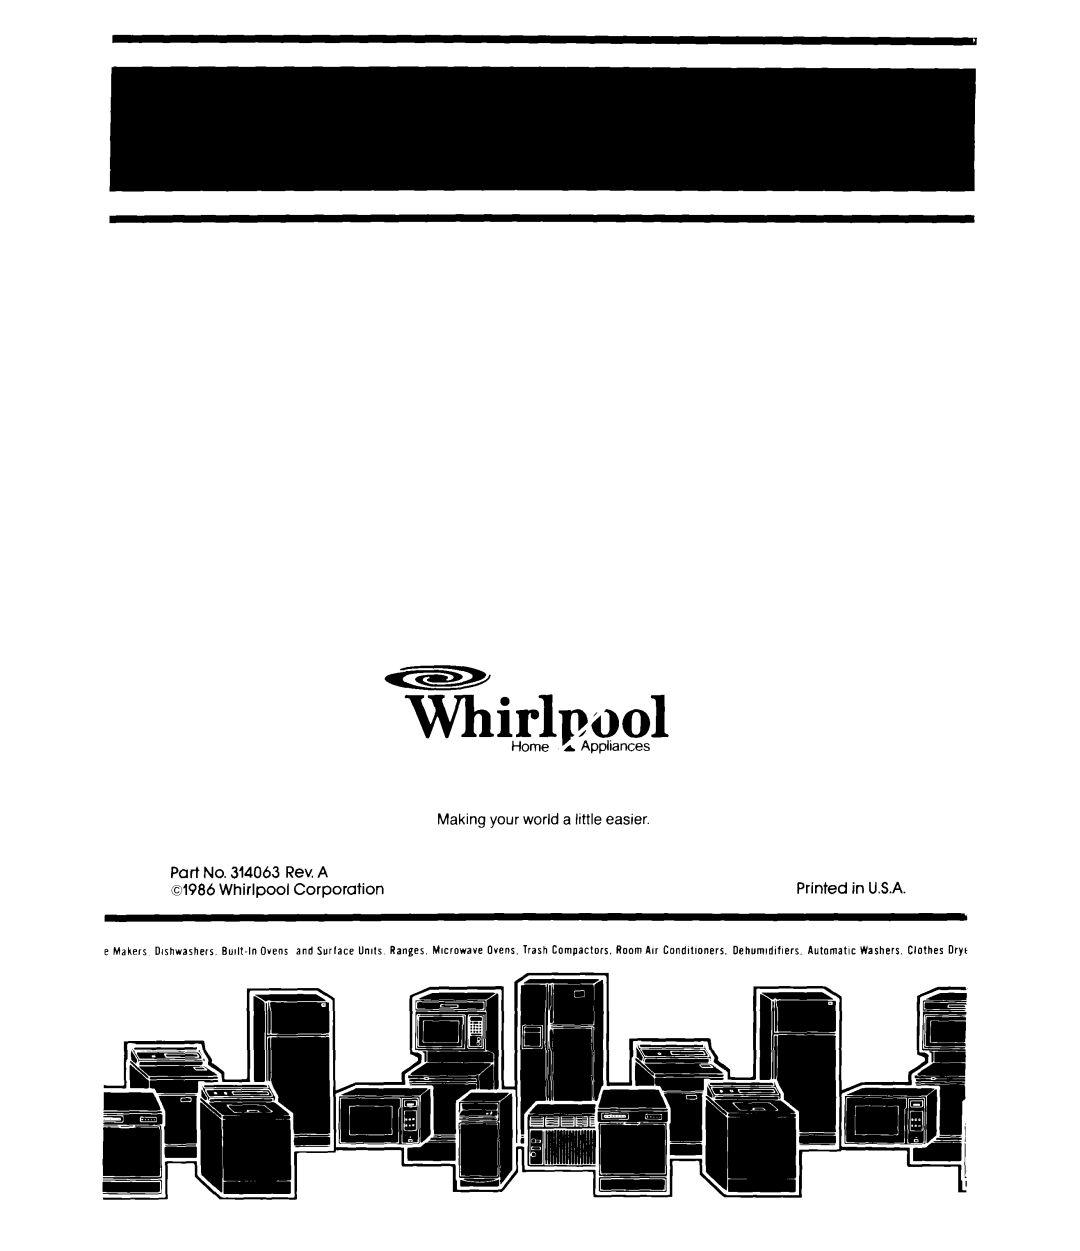 Whirlpool MW8500XR manual TKirlpool, Home, Making your world a little easier, Part No. 314063 Rev. A, Whirlpool Corporation 